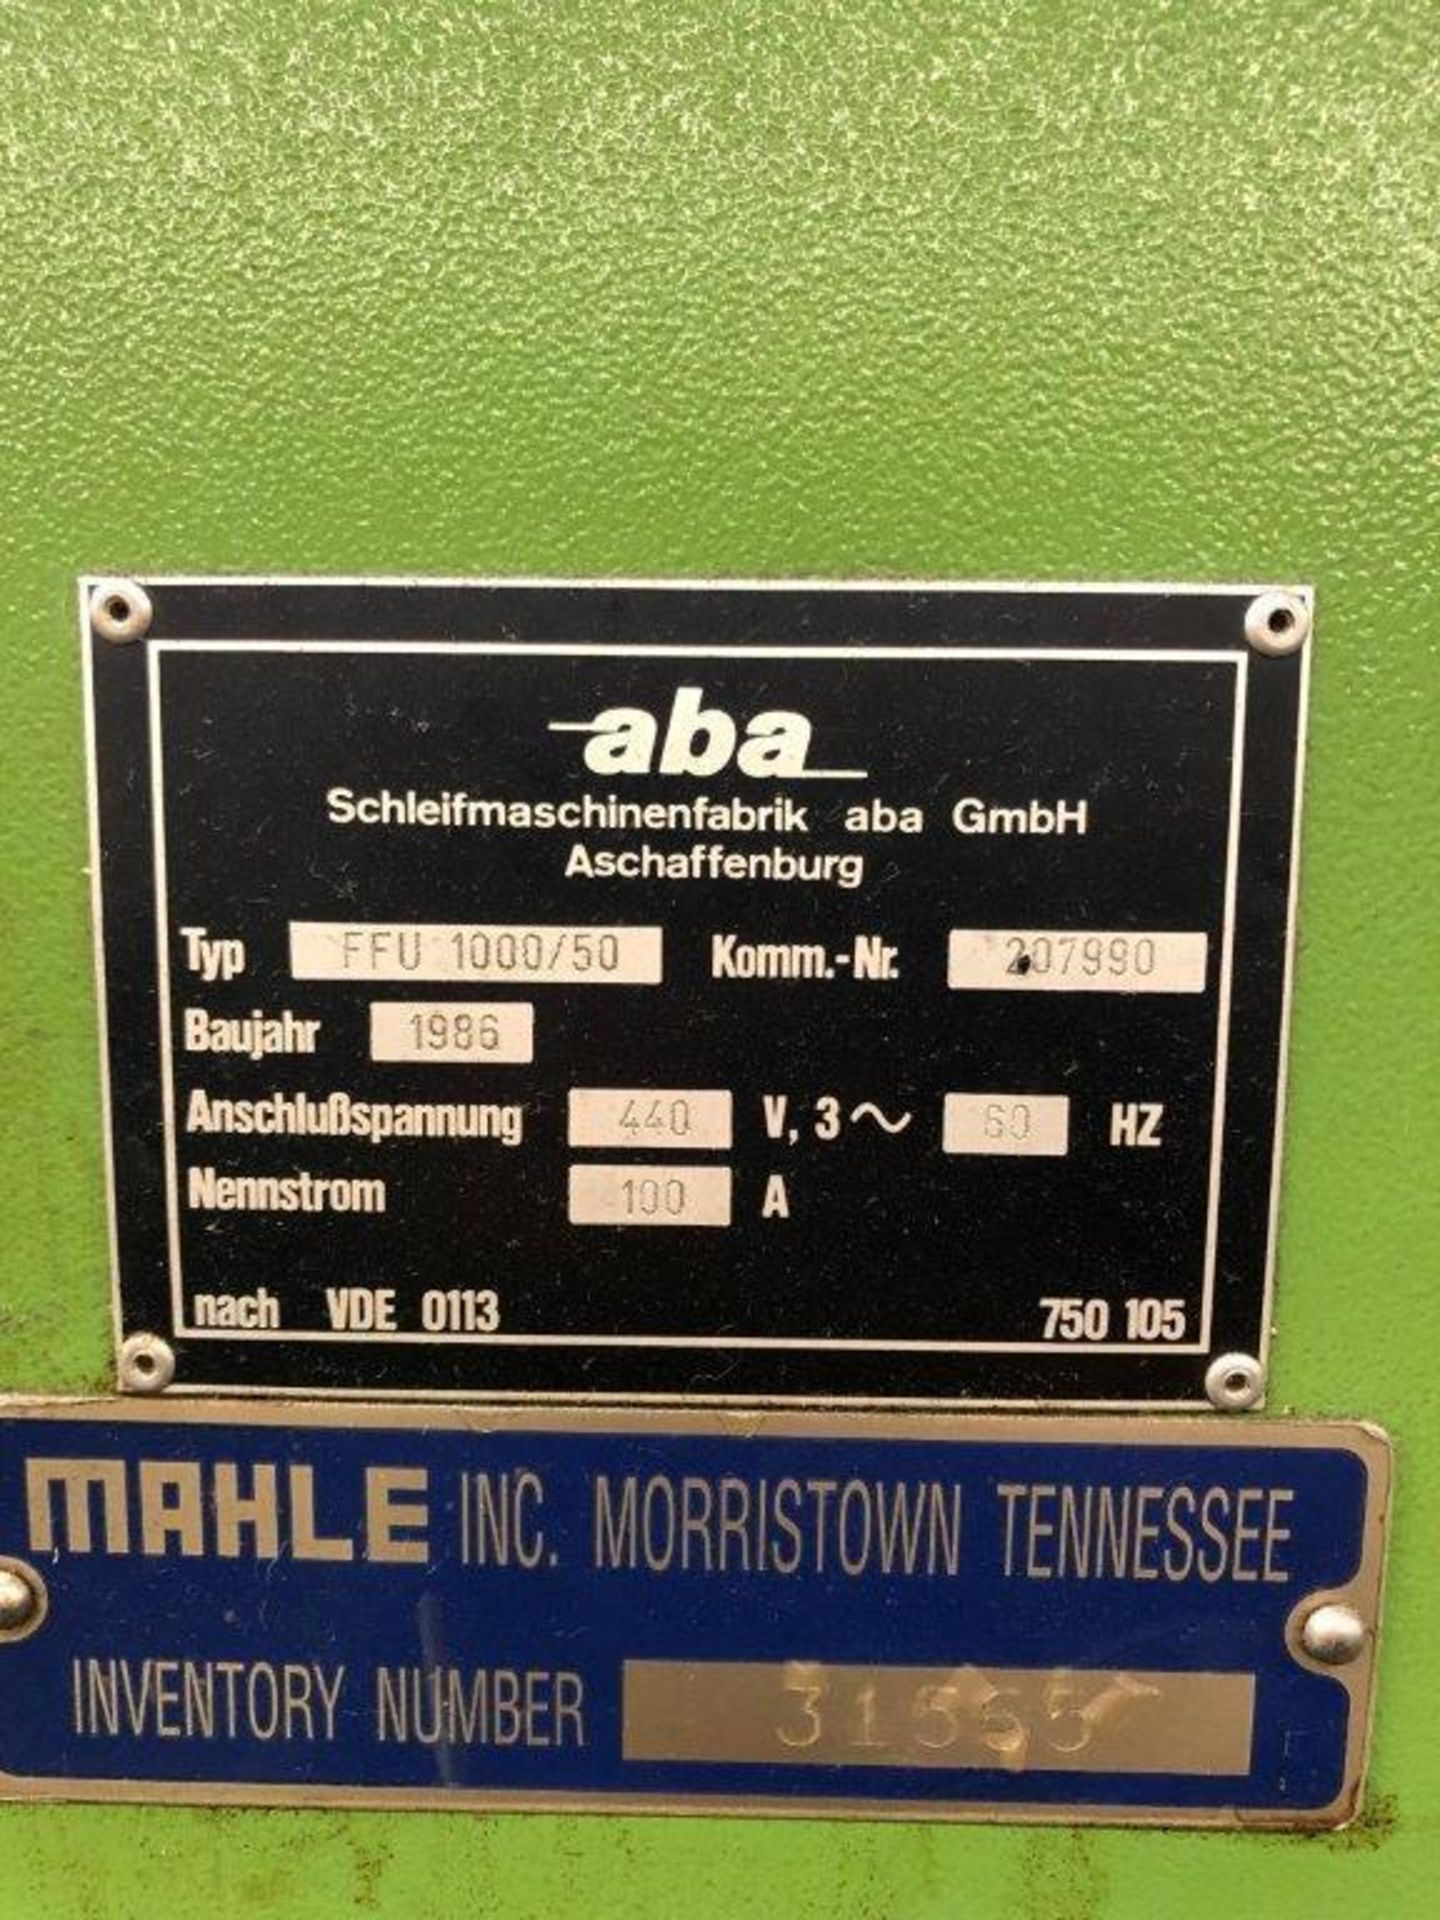 Aba FFU 1000/50 Surface Grinder, S/N 207990 (New 1986), 15.75" x 39" Electro-Magnetic Chuck - Image 10 of 10